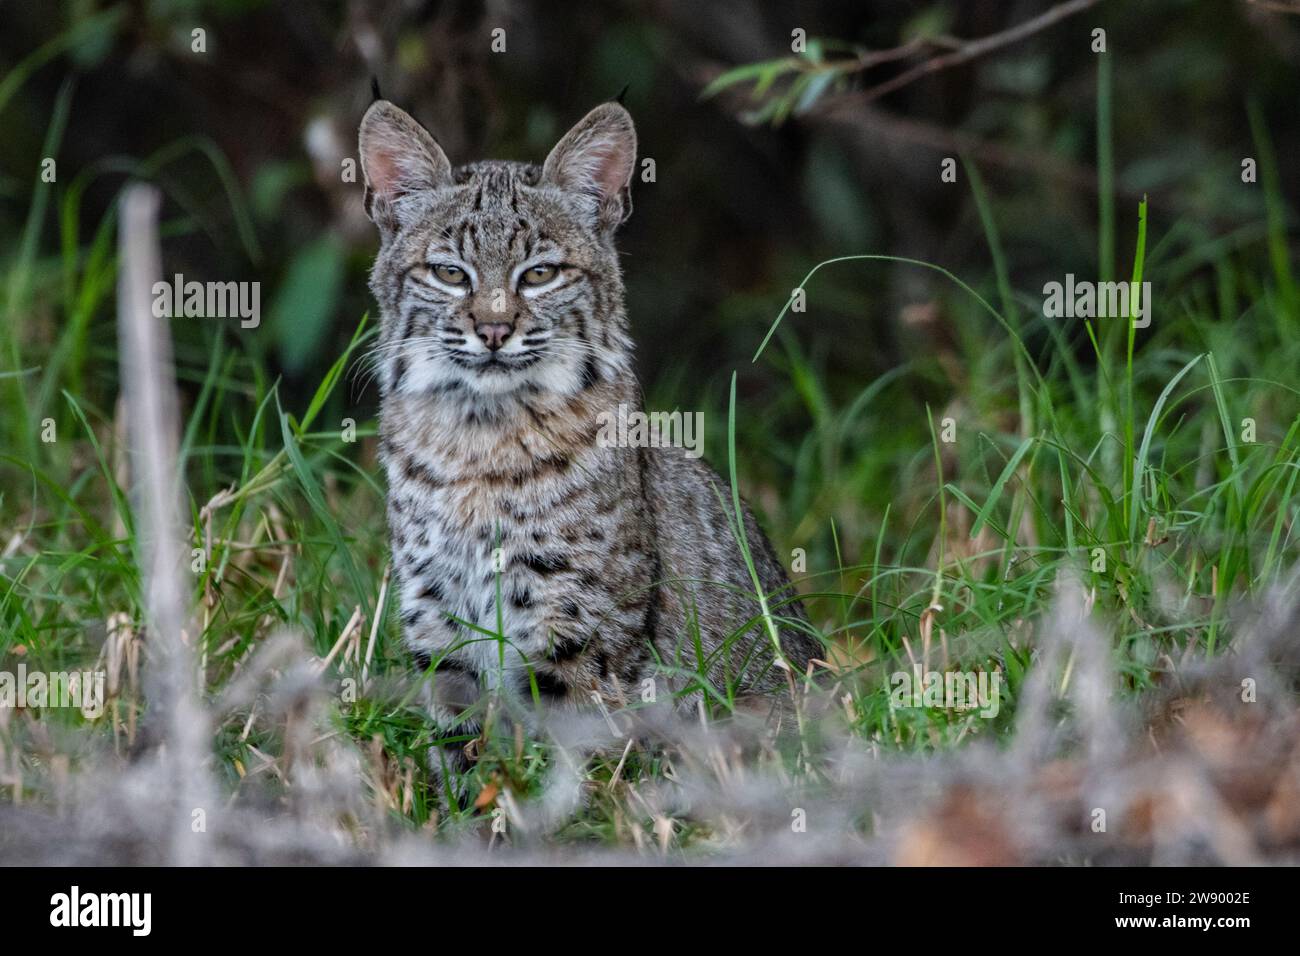 A young wild bobcat (Lynx rufus) sitting and facing the camera in Monterey County, California, USA. Stock Photo